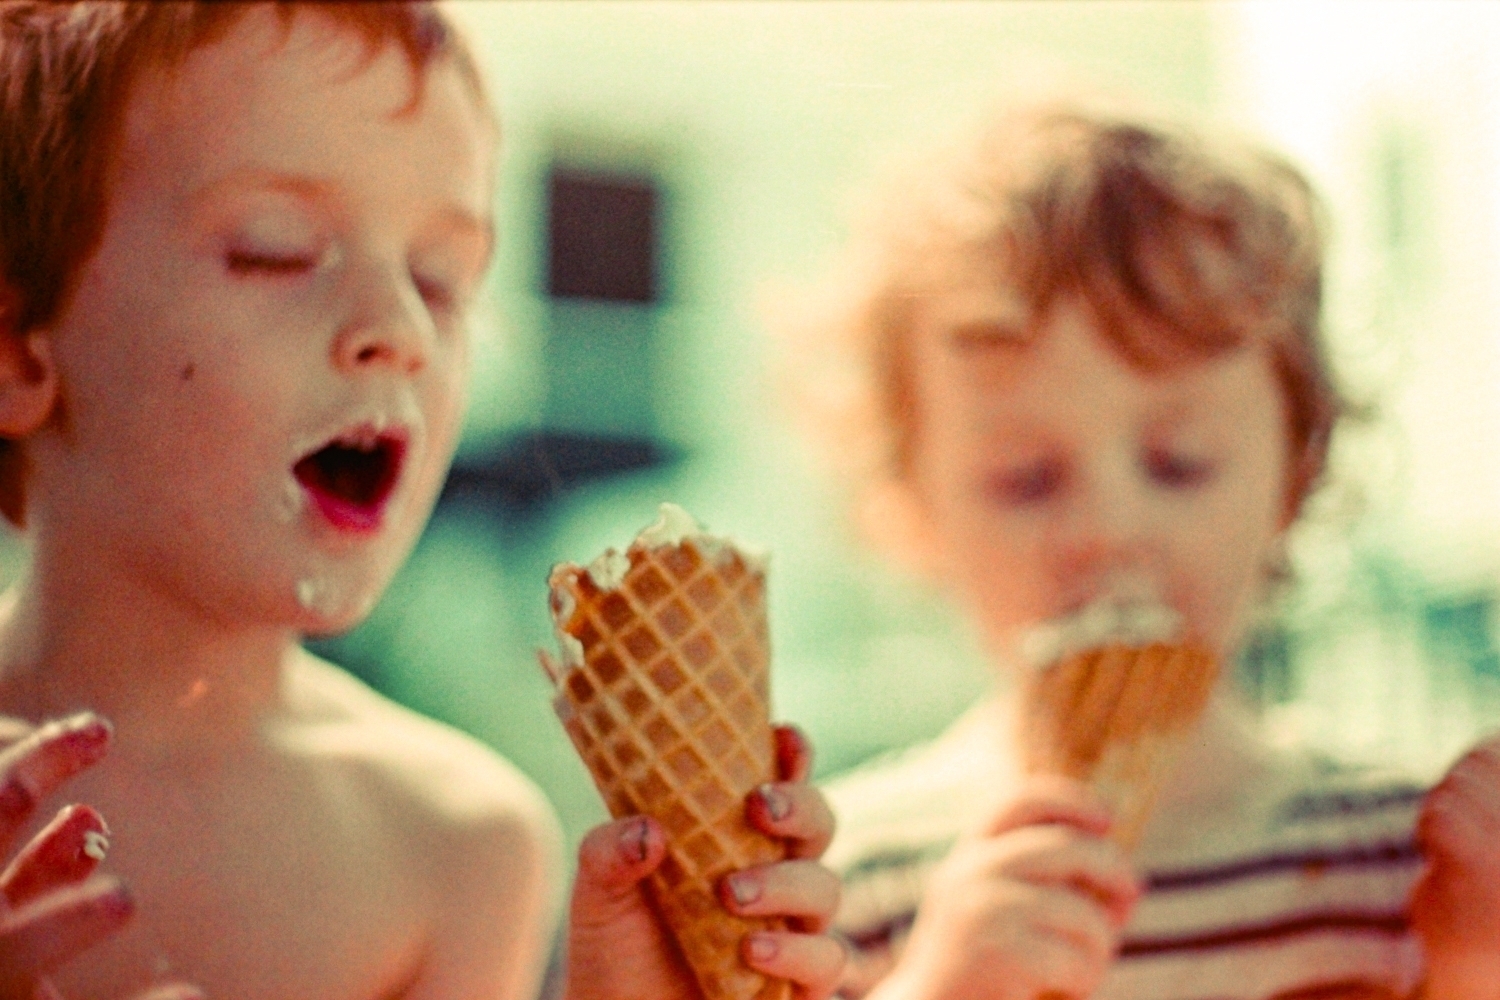 Photograph of two little boys eating ice-cream on their backyard, basking in a cinematic light